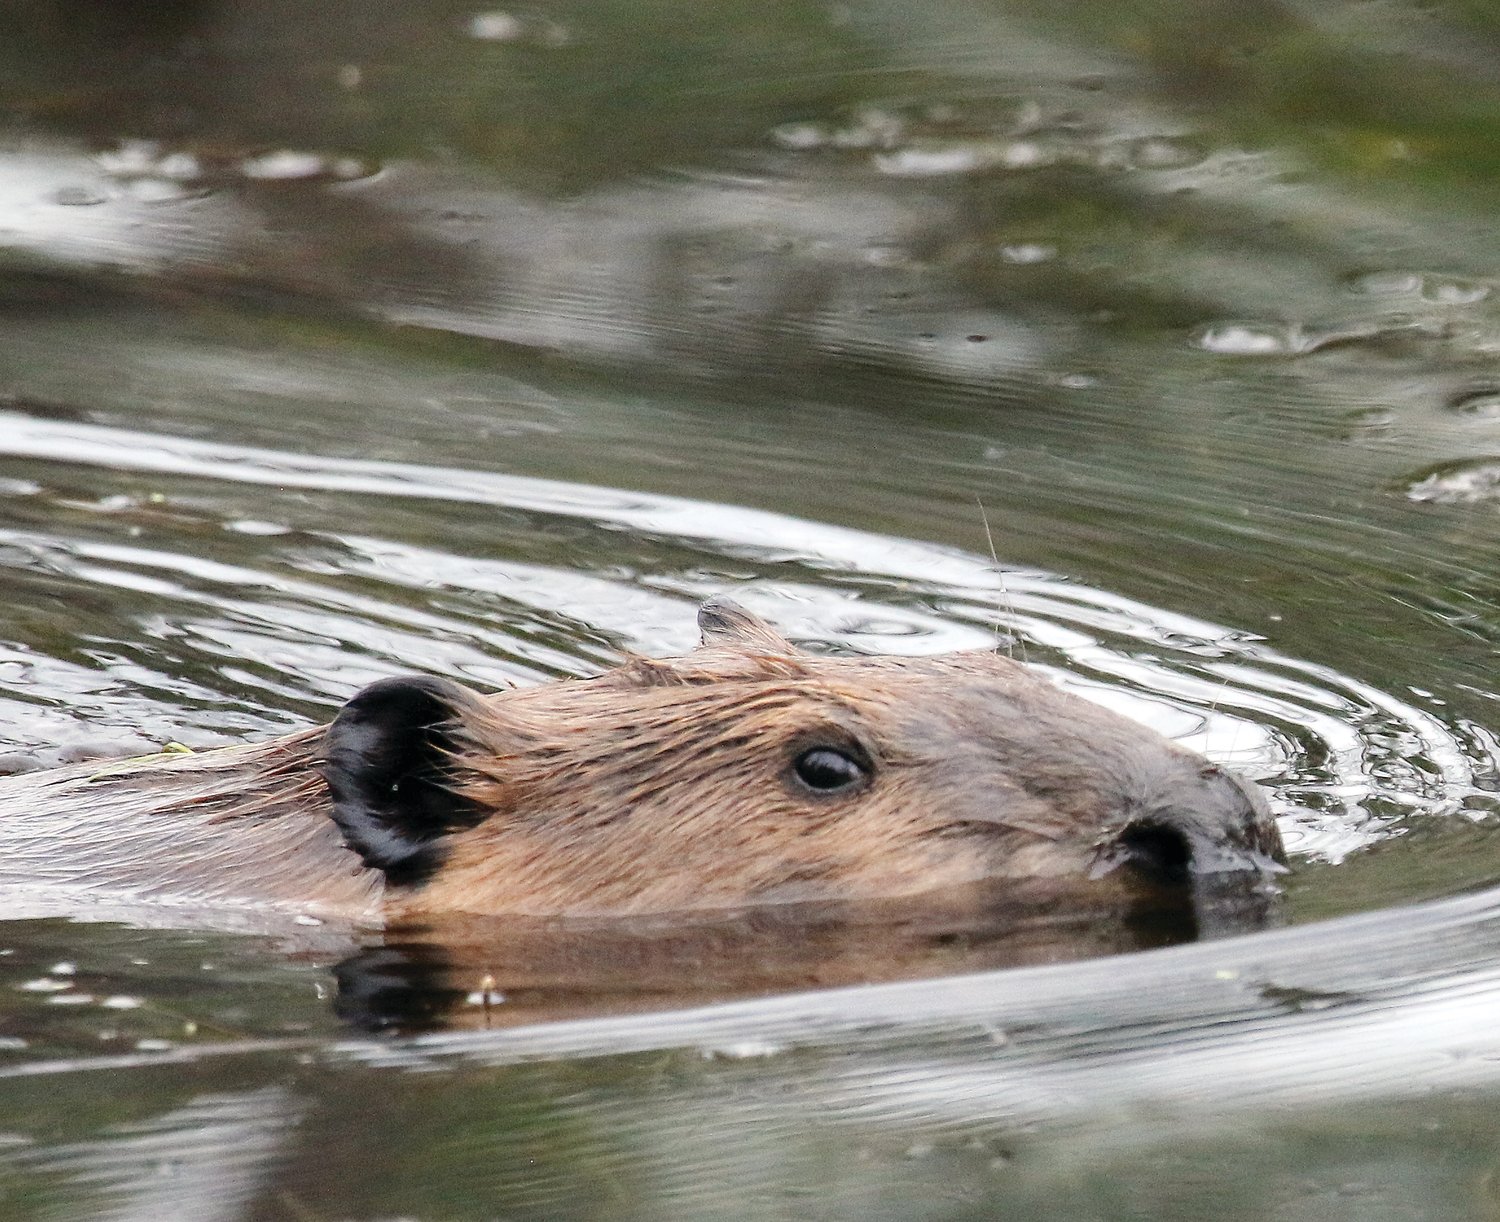 A beaver makes a drive-by, eyeing an unwelcome visitor to the pond.